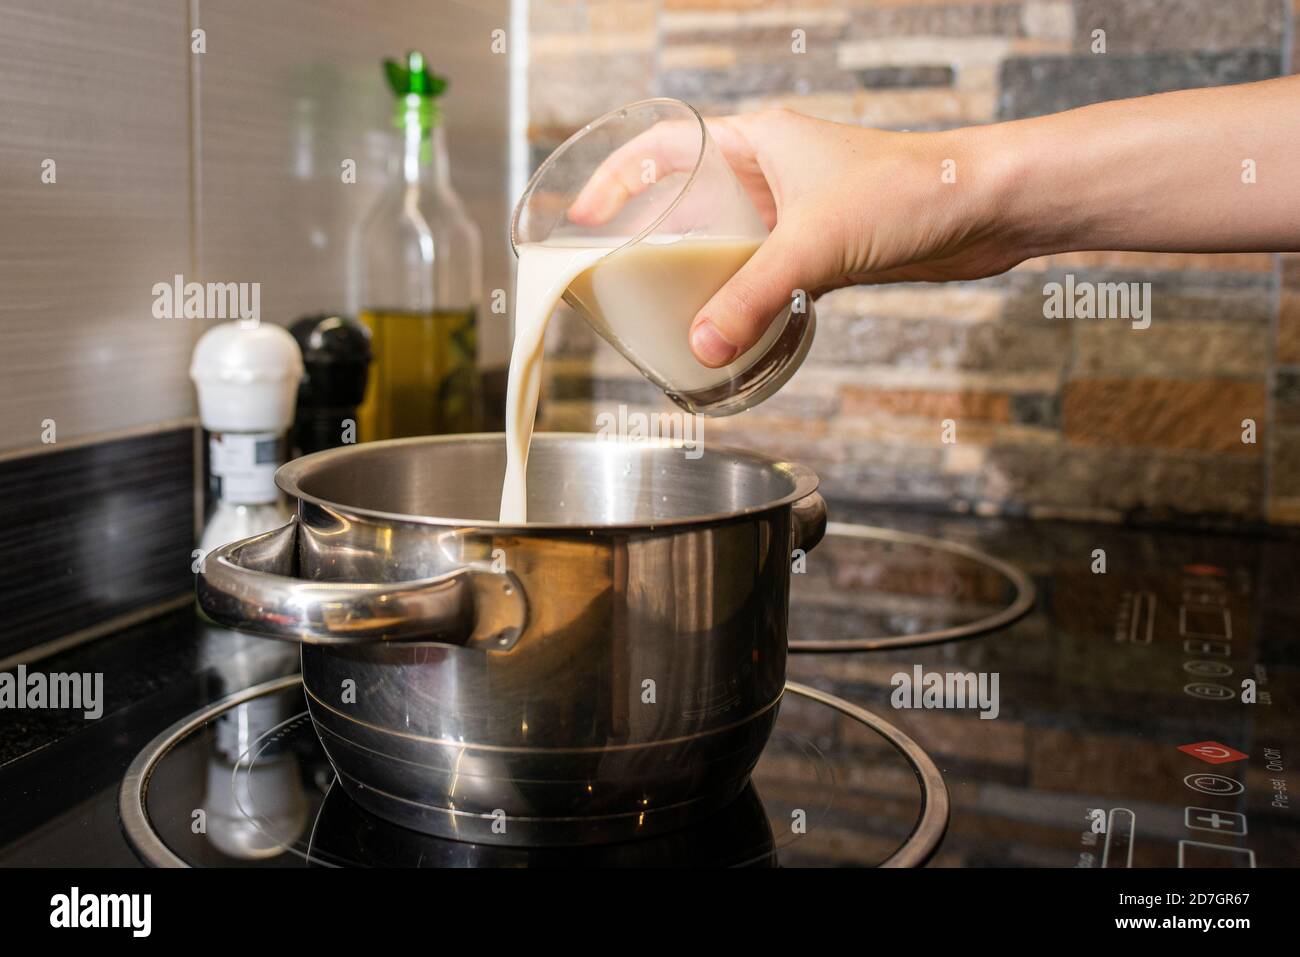 https://c8.alamy.com/comp/2D7GR67/closeup-of-a-person-making-oatmeal-with-milk-in-a-pot-on-the-stove-2D7GR67.jpg